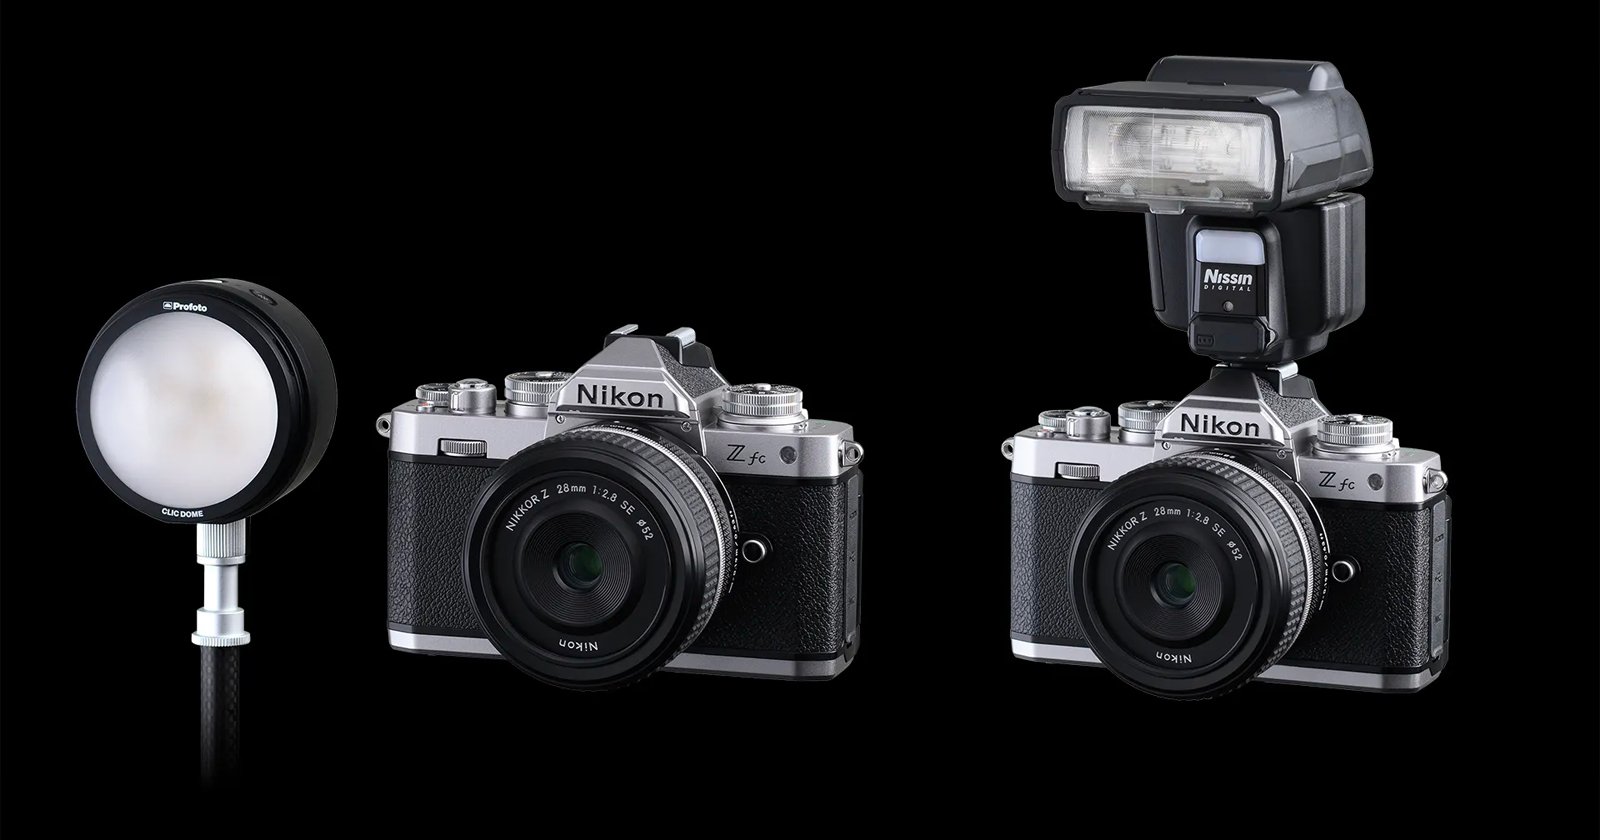 Nikon Z fc cameras along with Nissin and Profoto lighting products